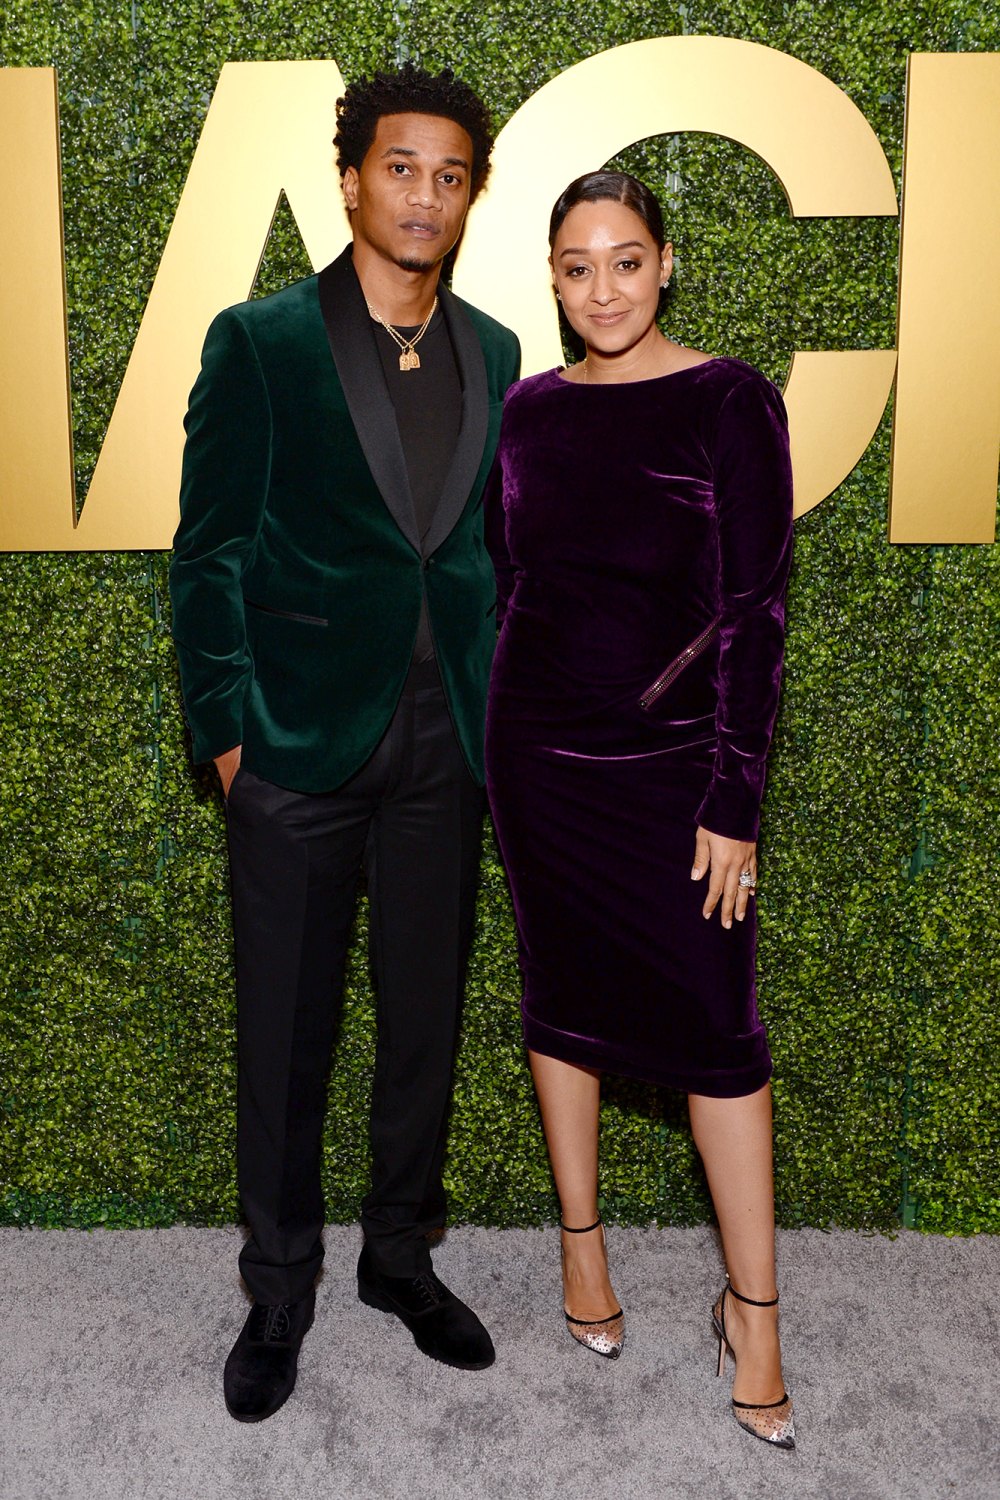 Tia Mowry and Ex-Husband Cory Hardrict Have Awkward Awards Show Red Carpet Run-In